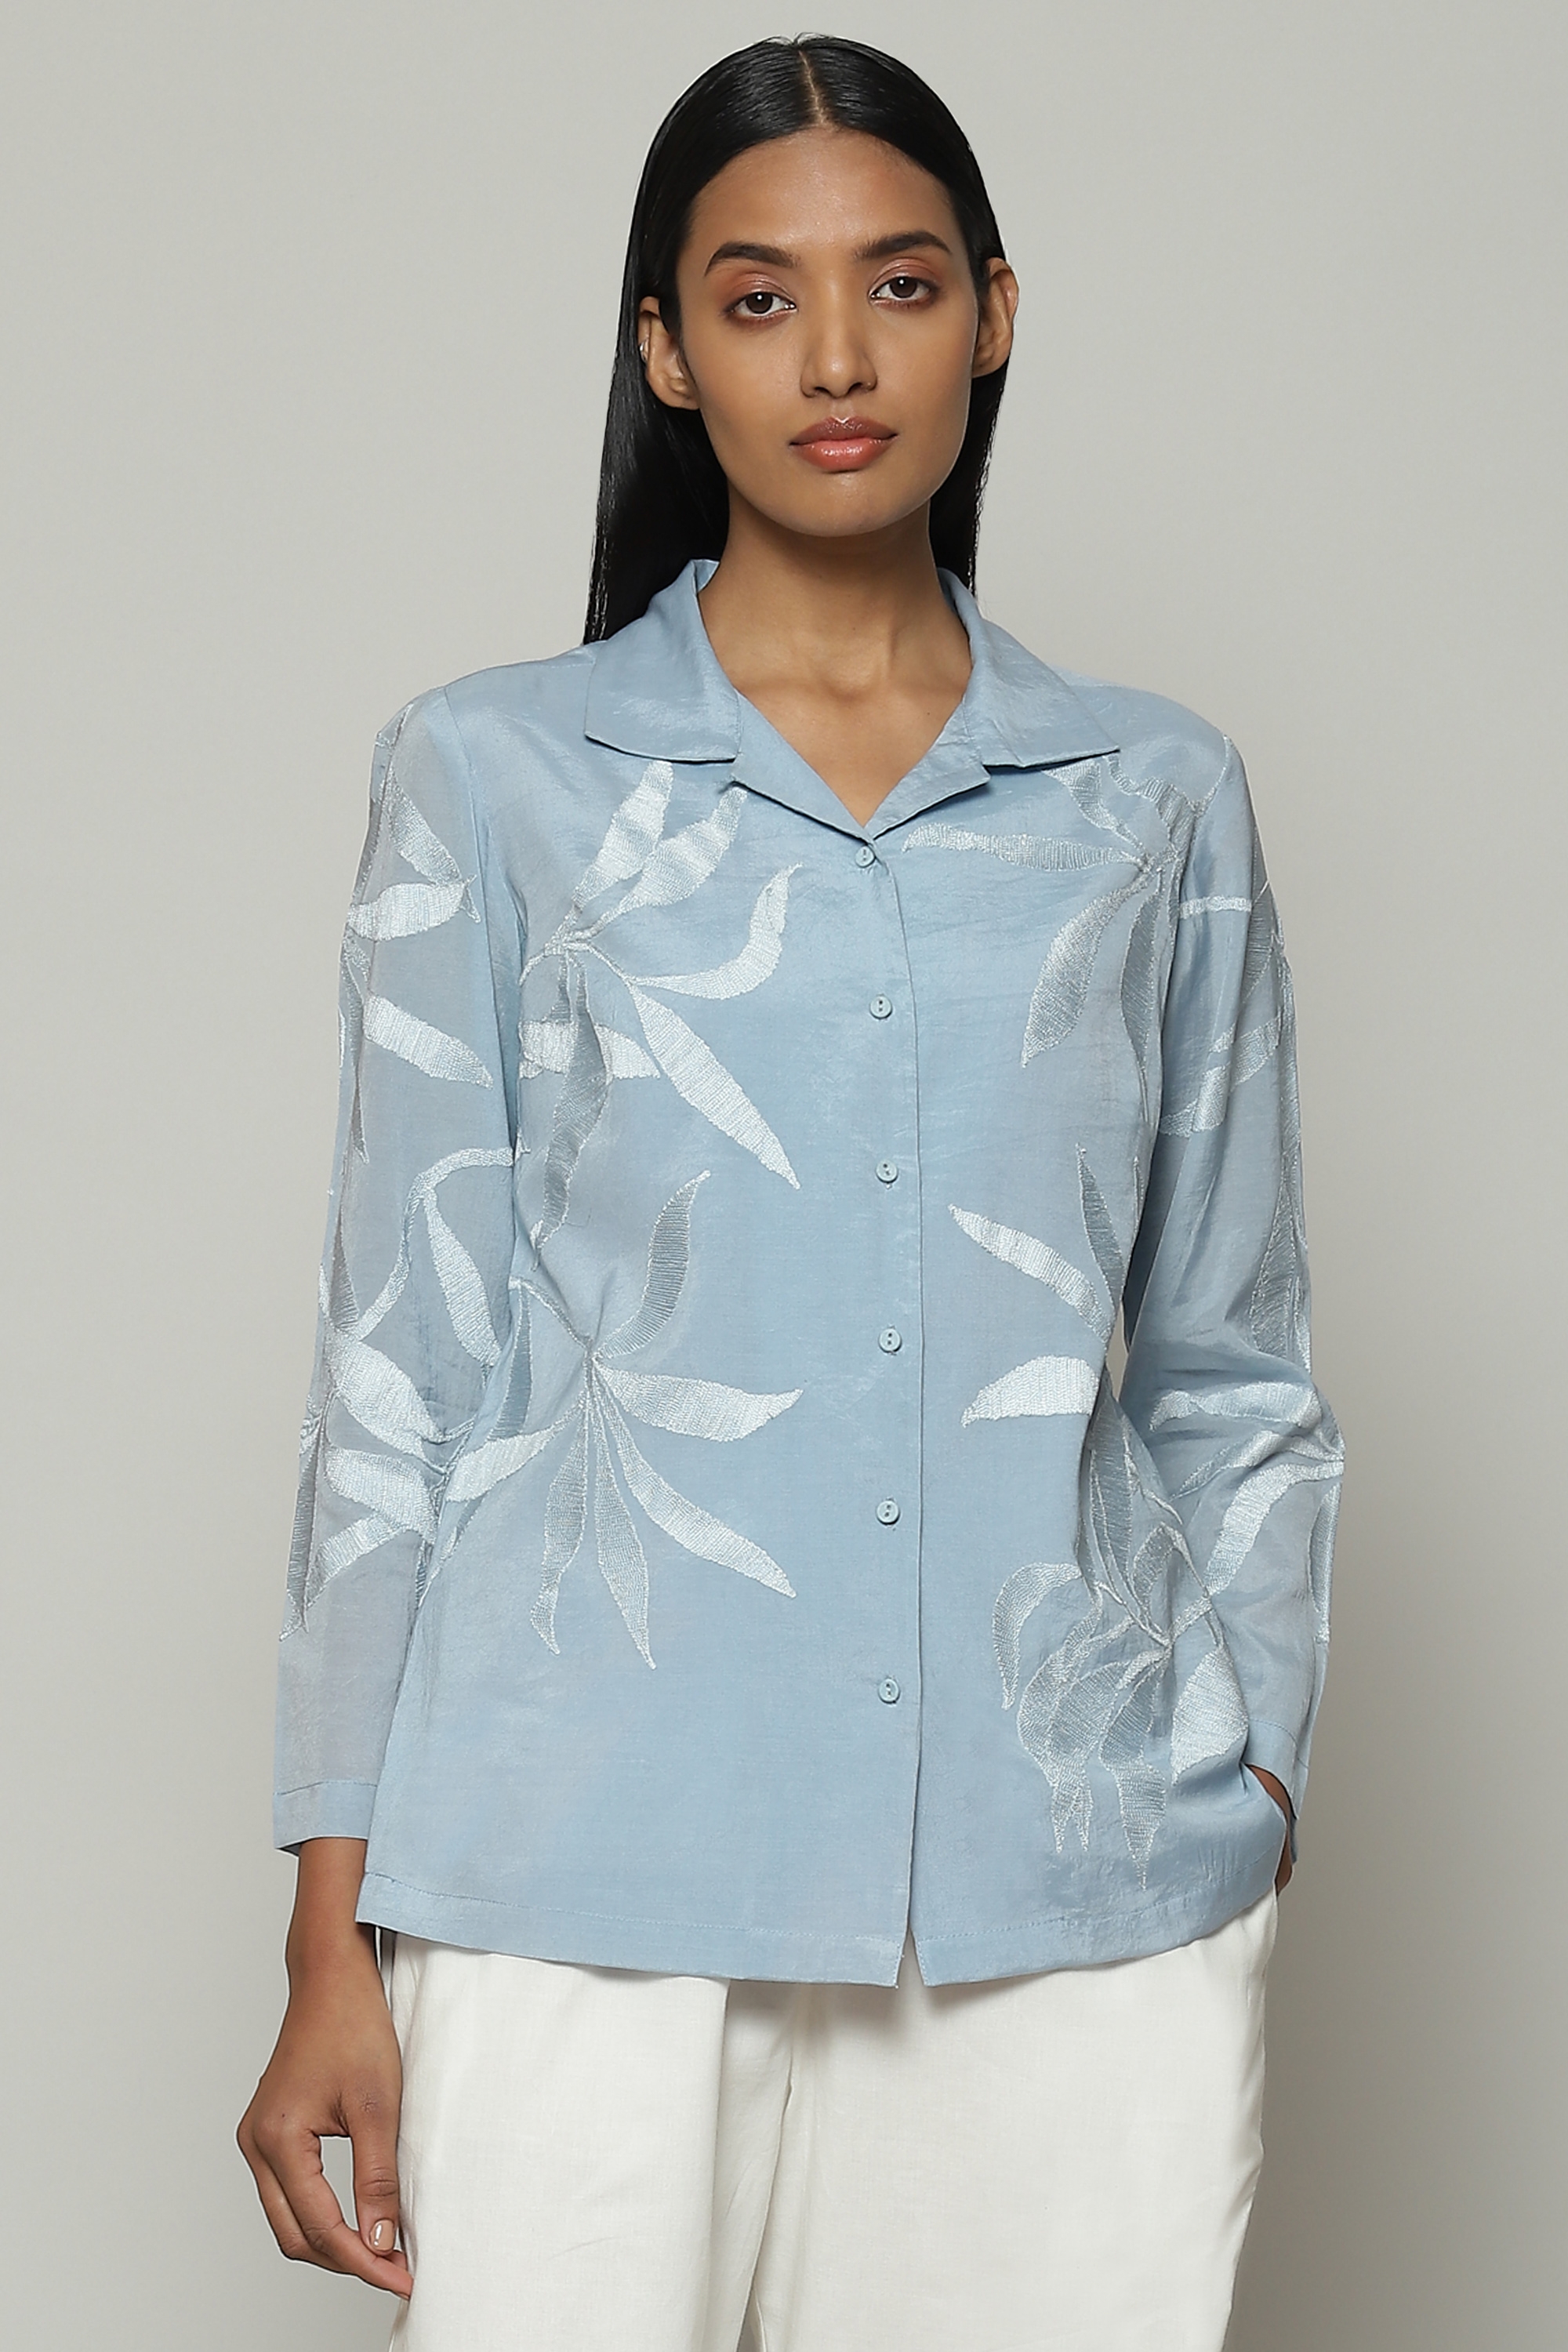 ABRAHAM AND THAKORE | Leaf Crewel Embroidered Luxe Voile Shirt Carolina